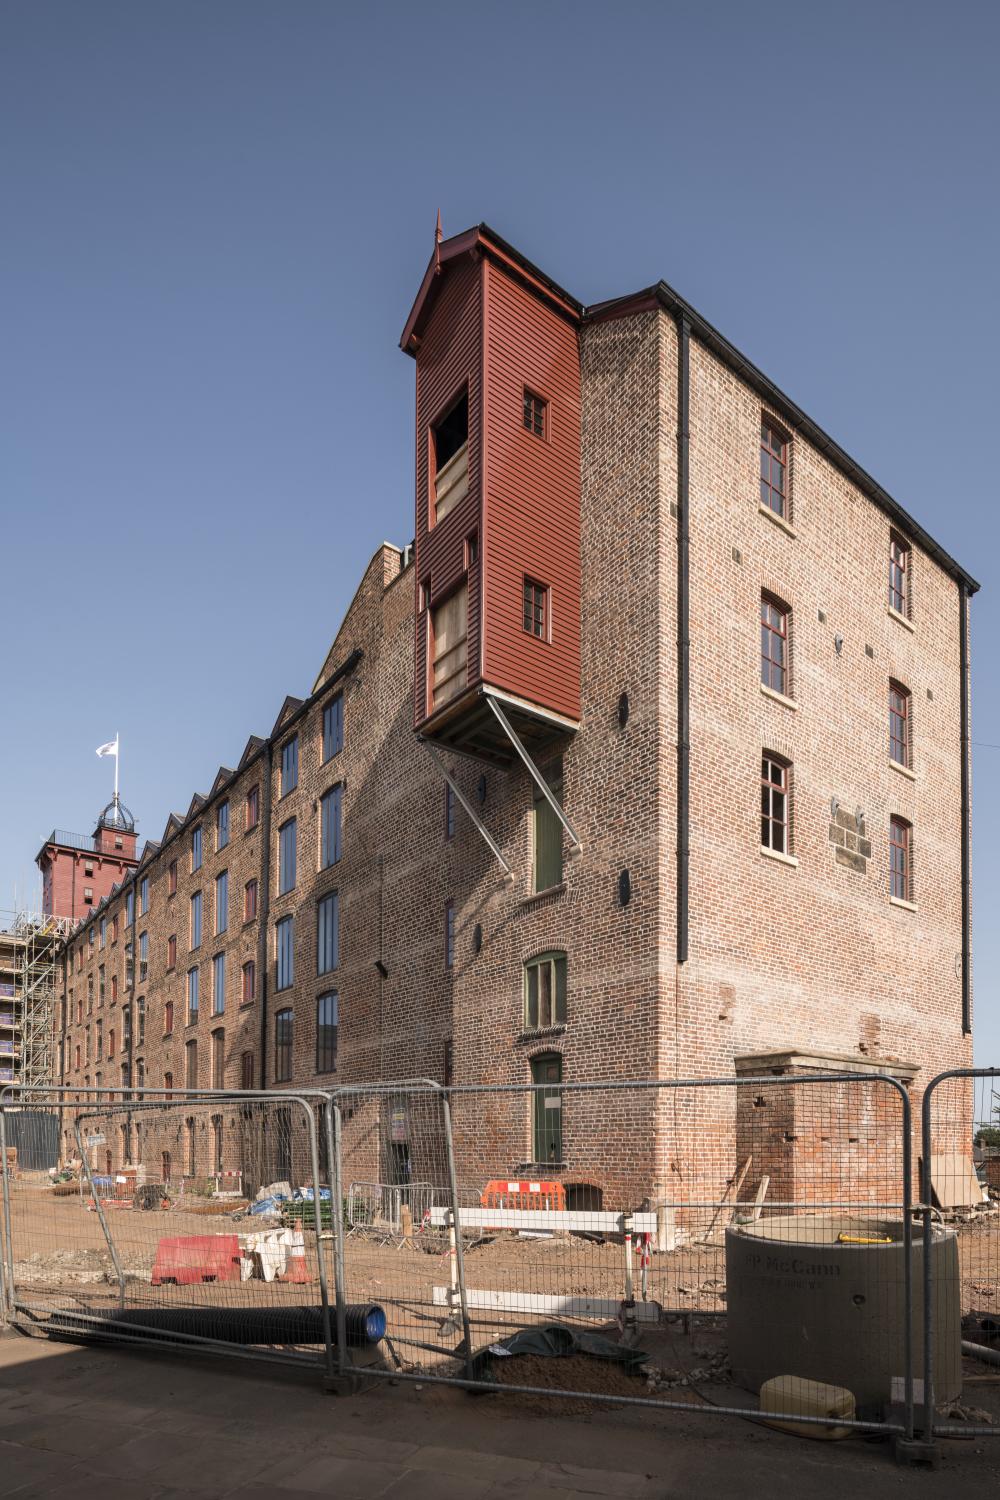 A five storey brick warehouse type building with security fencing and building materials in the foreground.